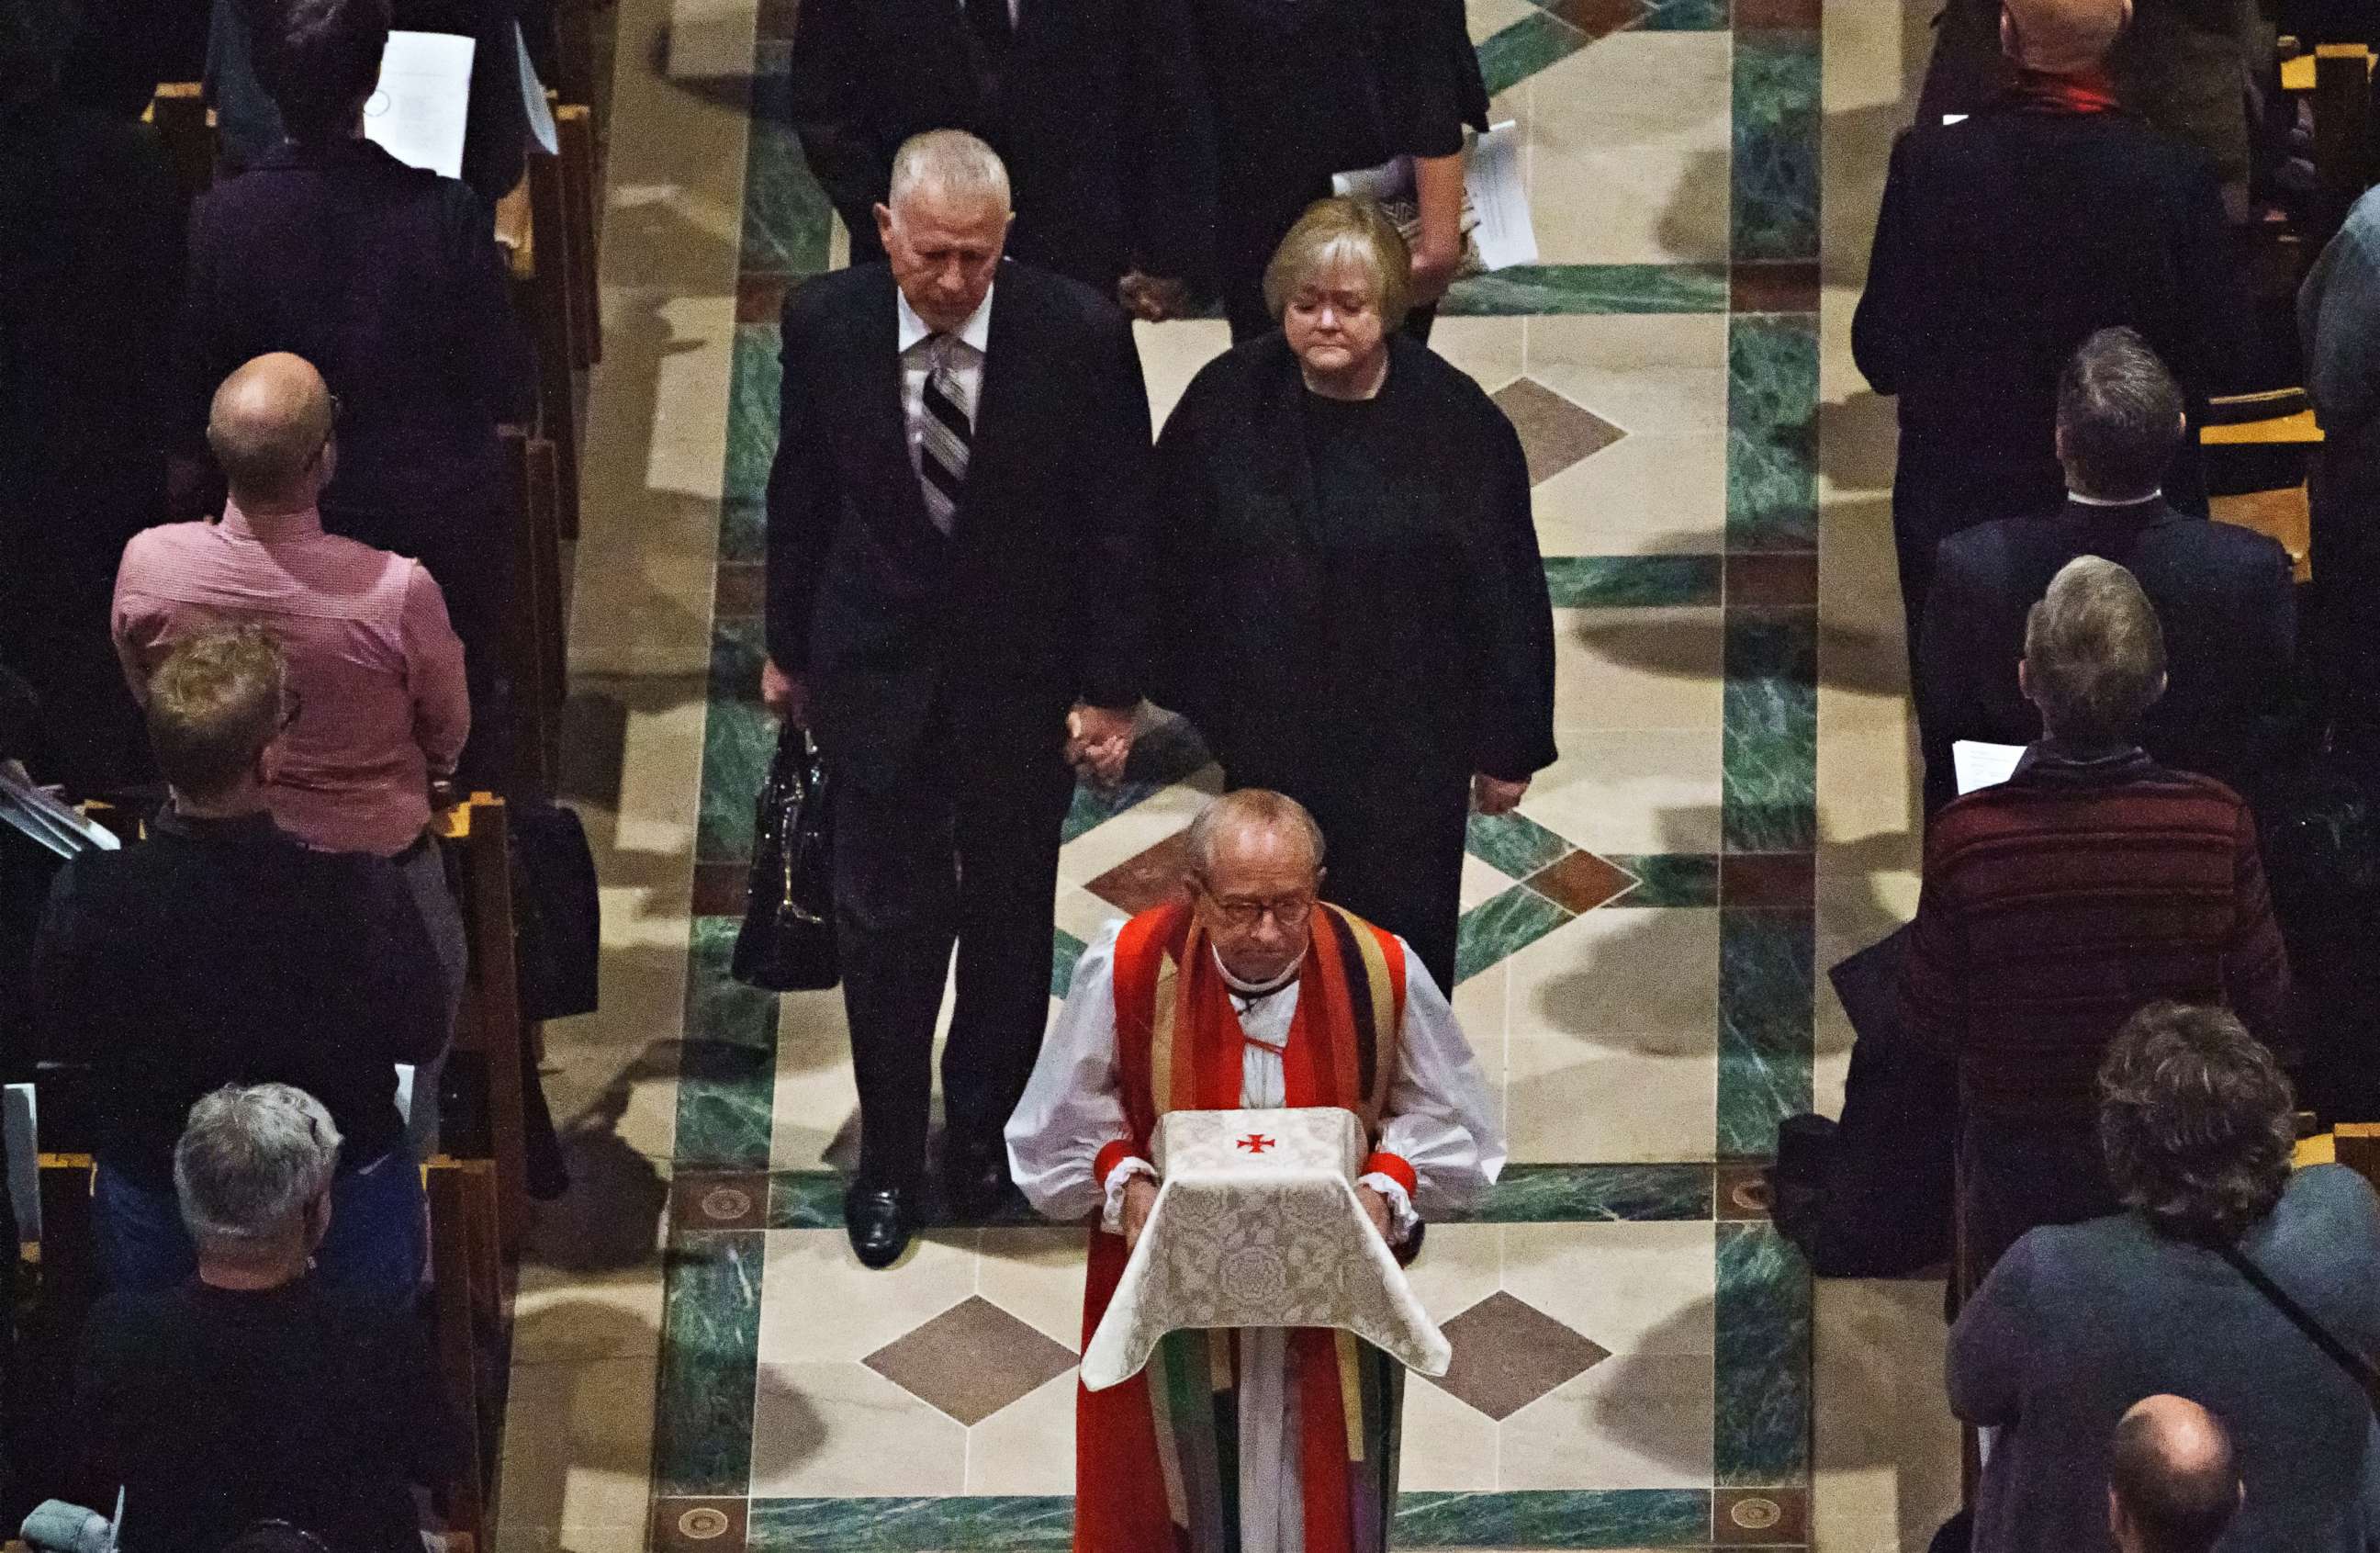 Dennis and Judy Shepard hold hands as they walk behind Rev. V. Gene Robinson carrying their son's ashes at the conclusion of a "Thanksgiving and Remembrance of Matthew Shepard" service at Washington National Cathedral in Washington, Oct. 26, 2018. 